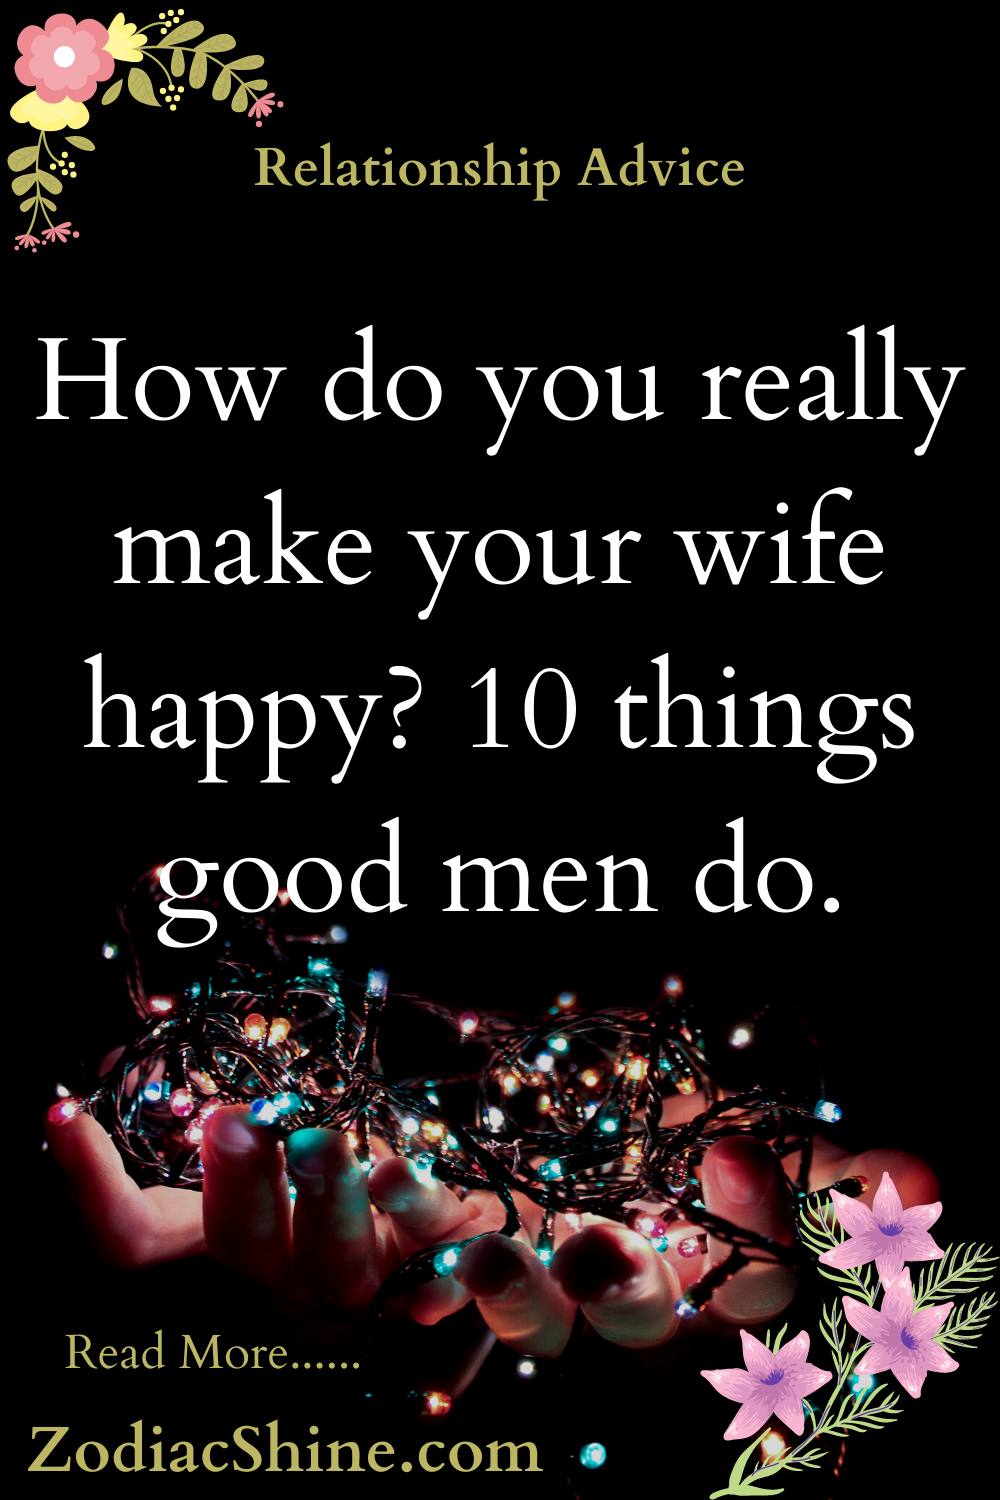 How do you really make your wife happy? 10 things good men do